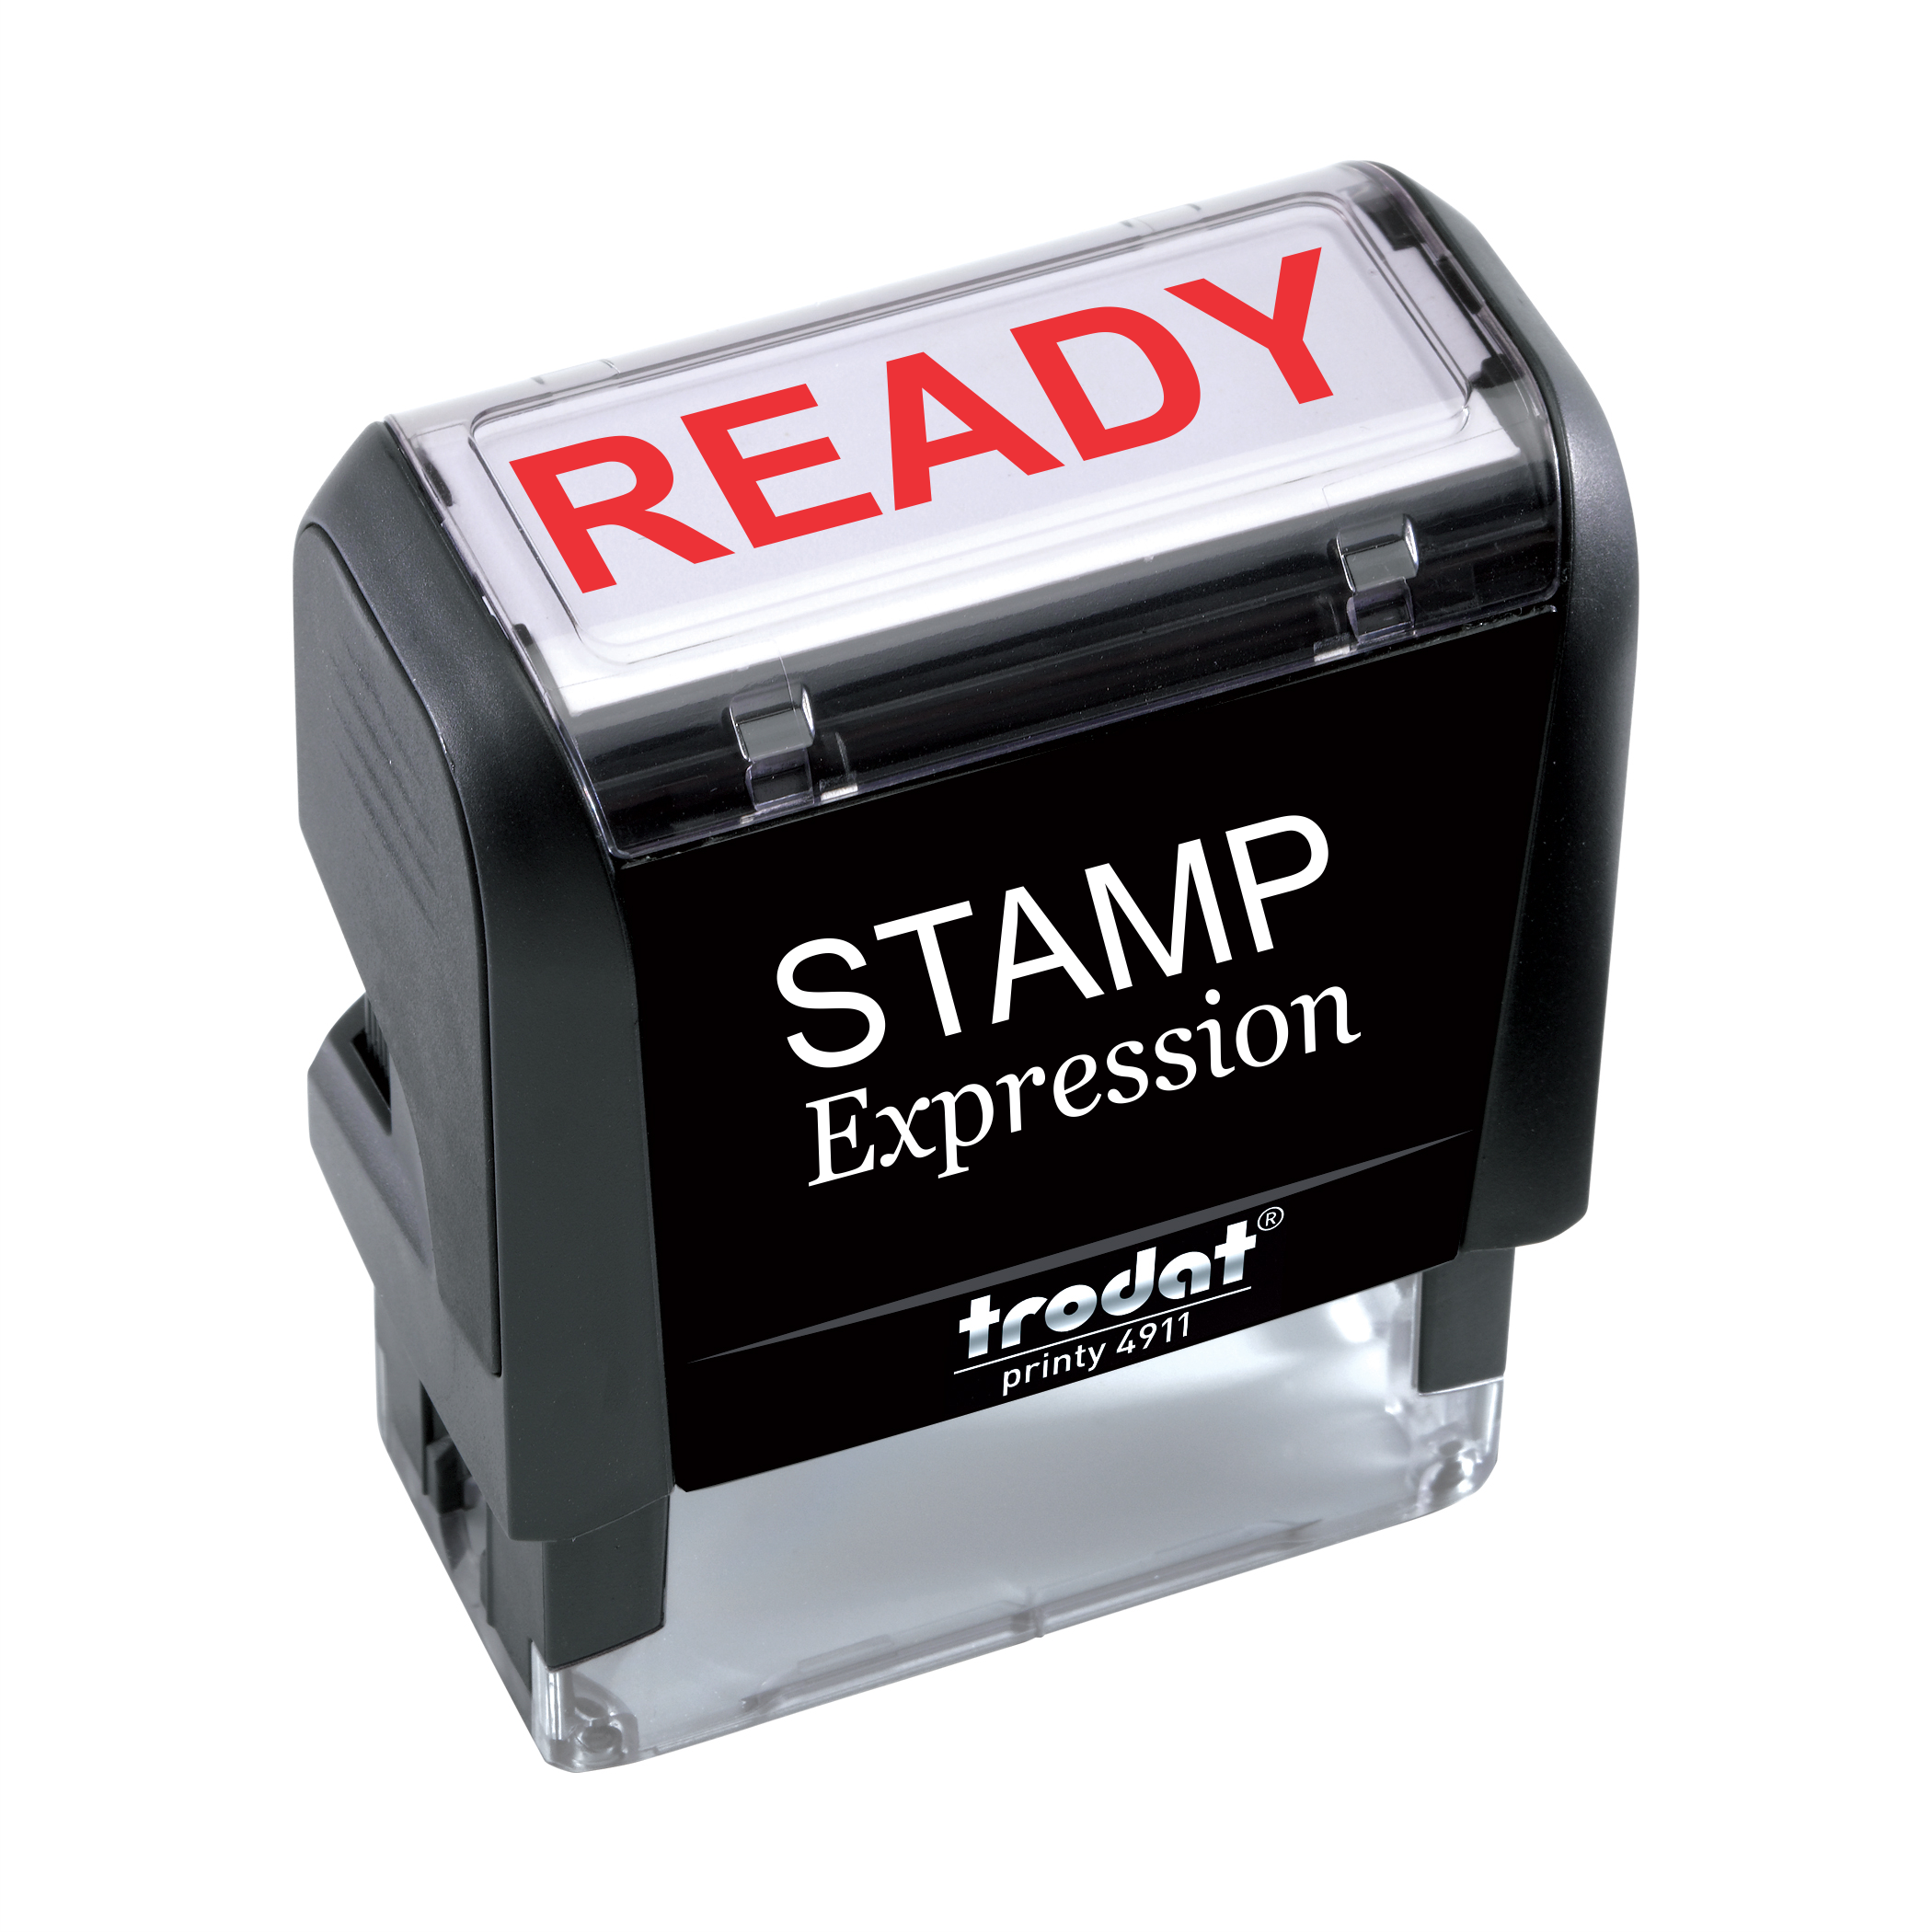 Ready Office Self Inking Rubber Stamp